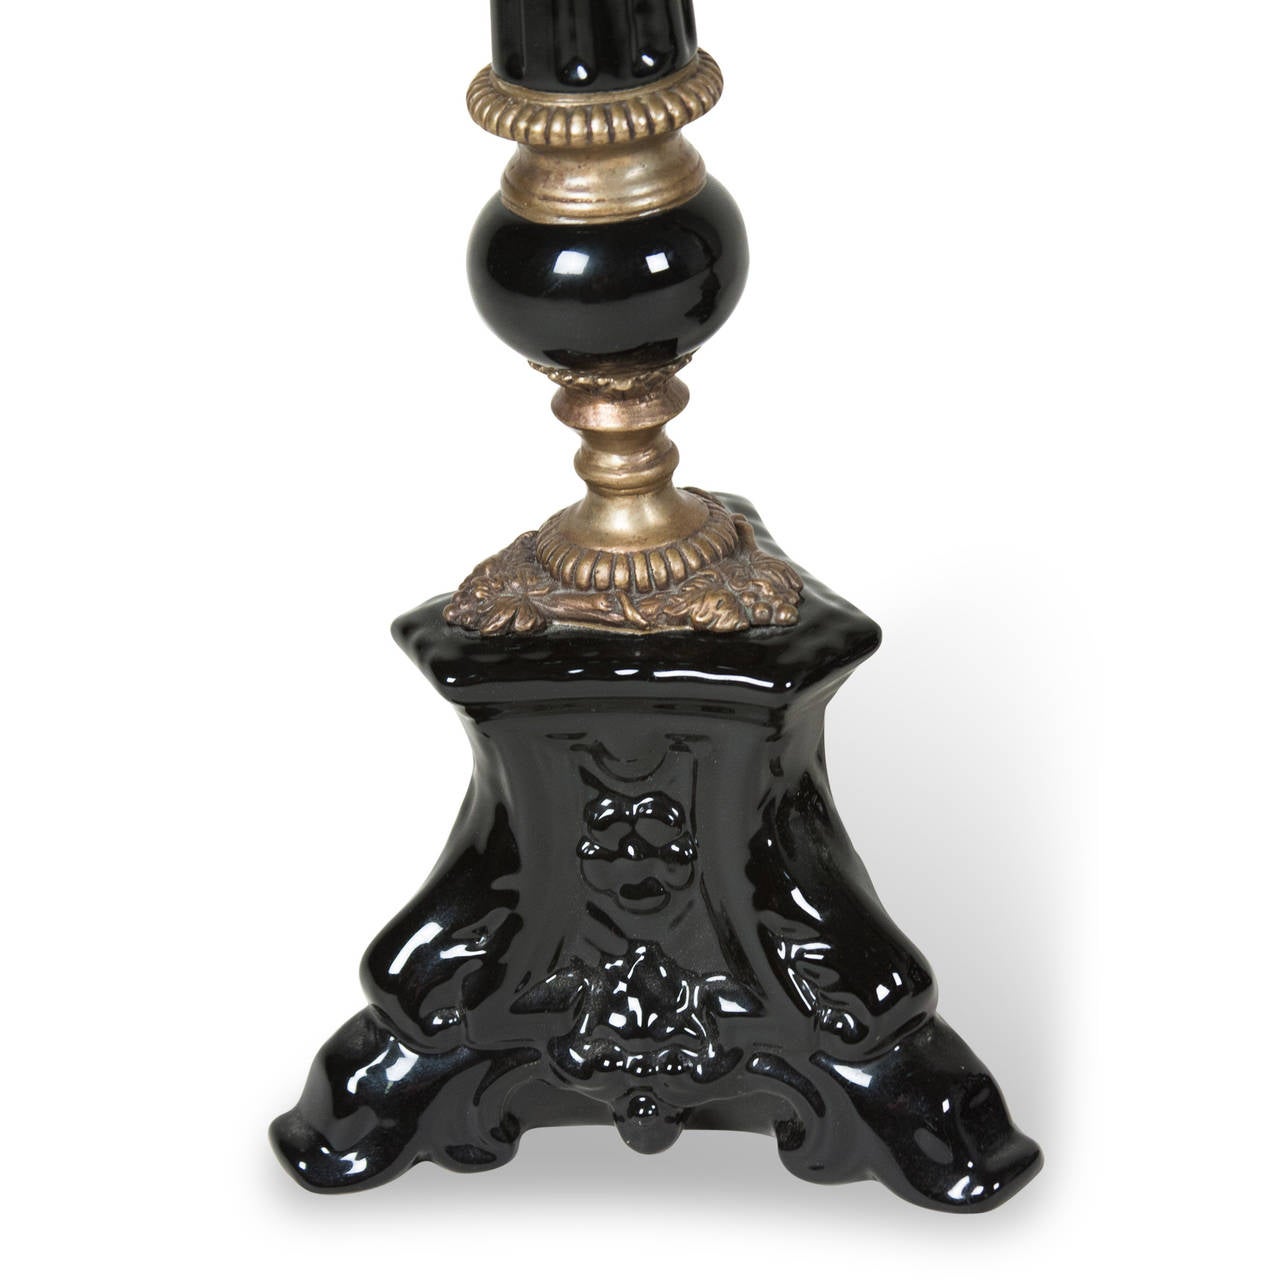 Pair of molded black ceramic candlestick holders, tripod base, tapered column with brass decorative elements, French 1940s. Height 19 1/4 in, width at base 5 1/2 in. (Item #2147)